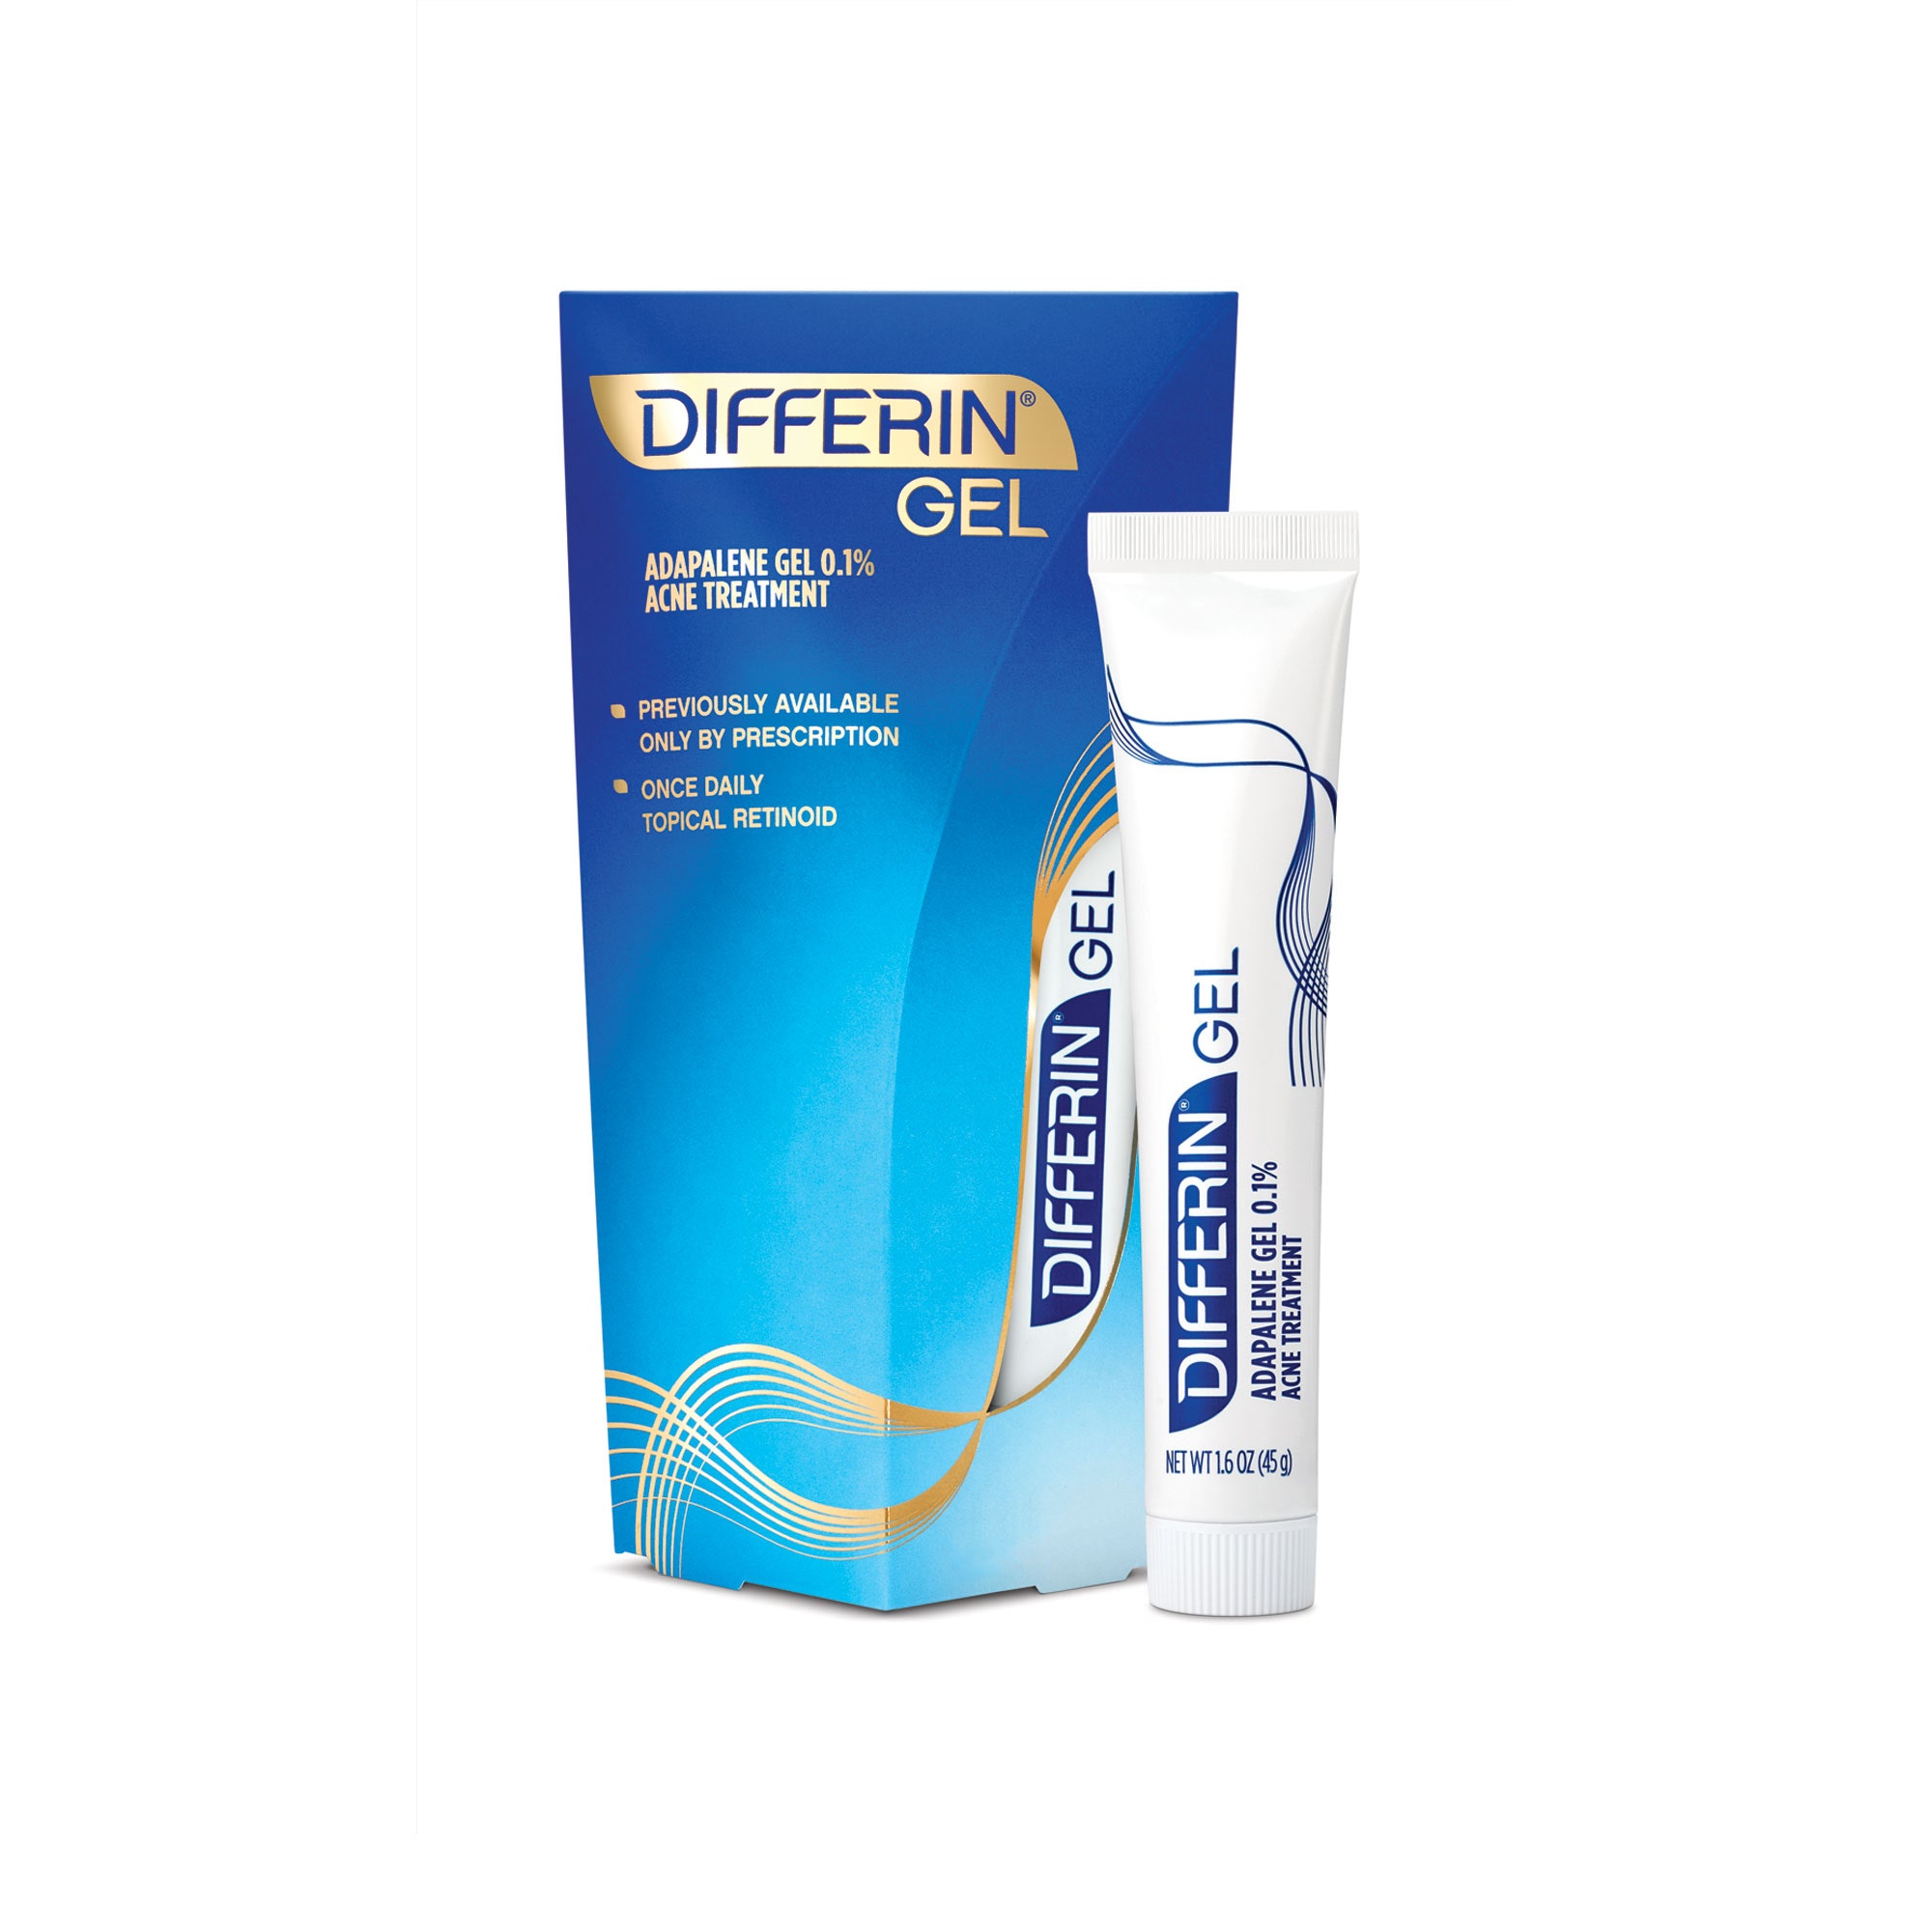 Review: Differin Gel Is One of the Best Over-the-Counter Treatments for Acne